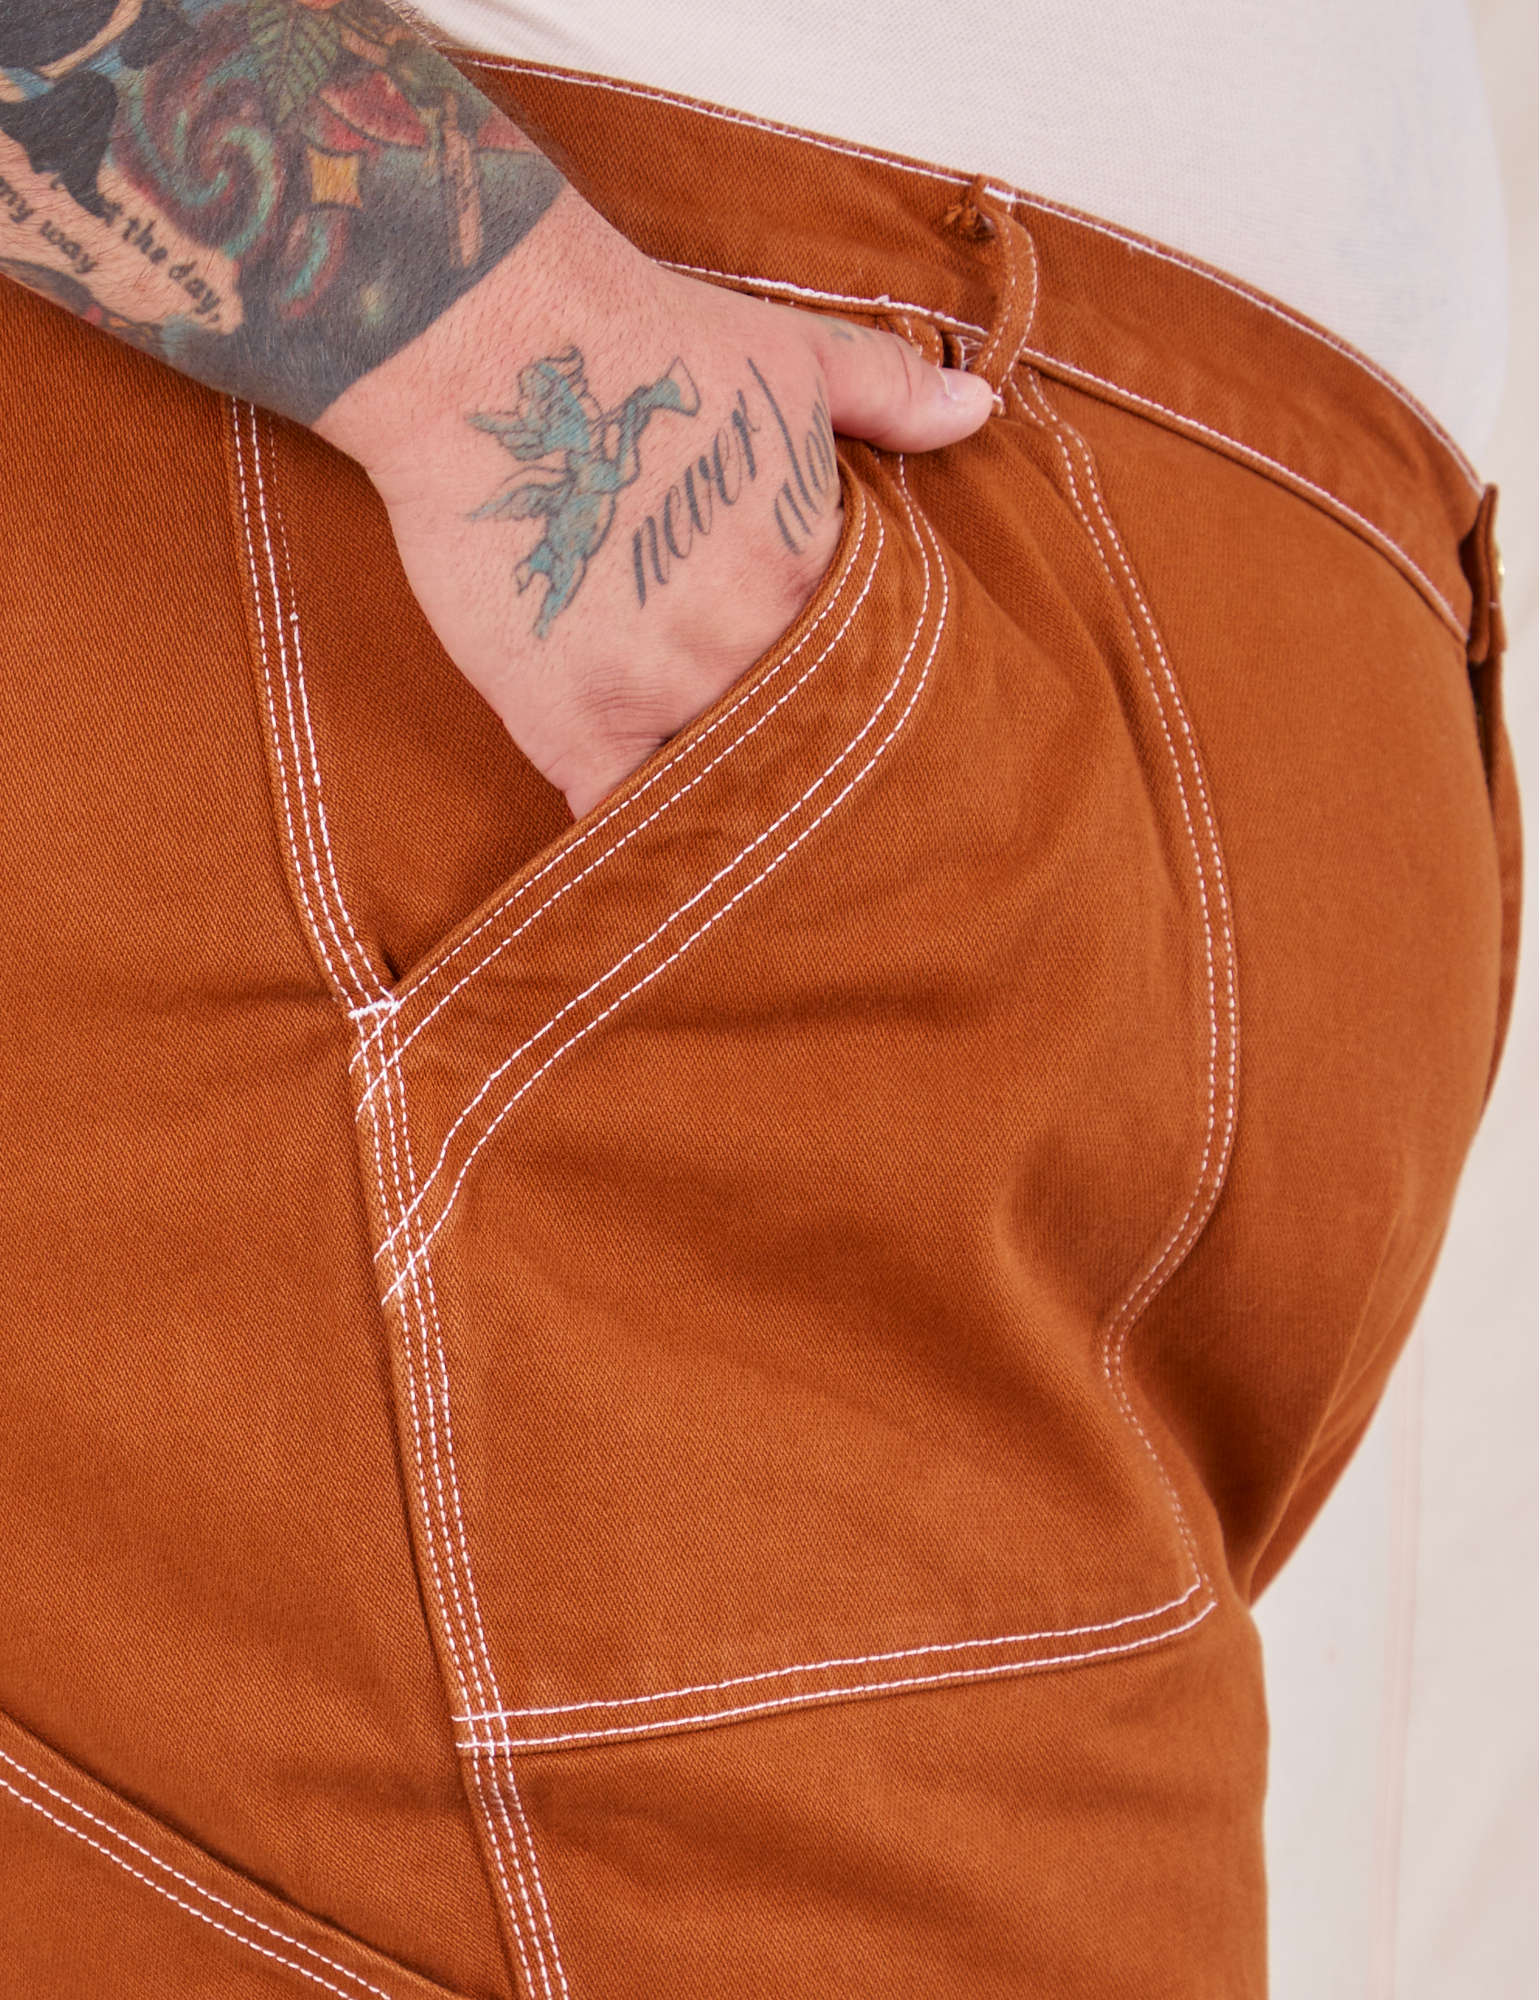 Carpenter Jeans in Burnt Terracotta front pocket close up. Sam has their hand in the pocket.